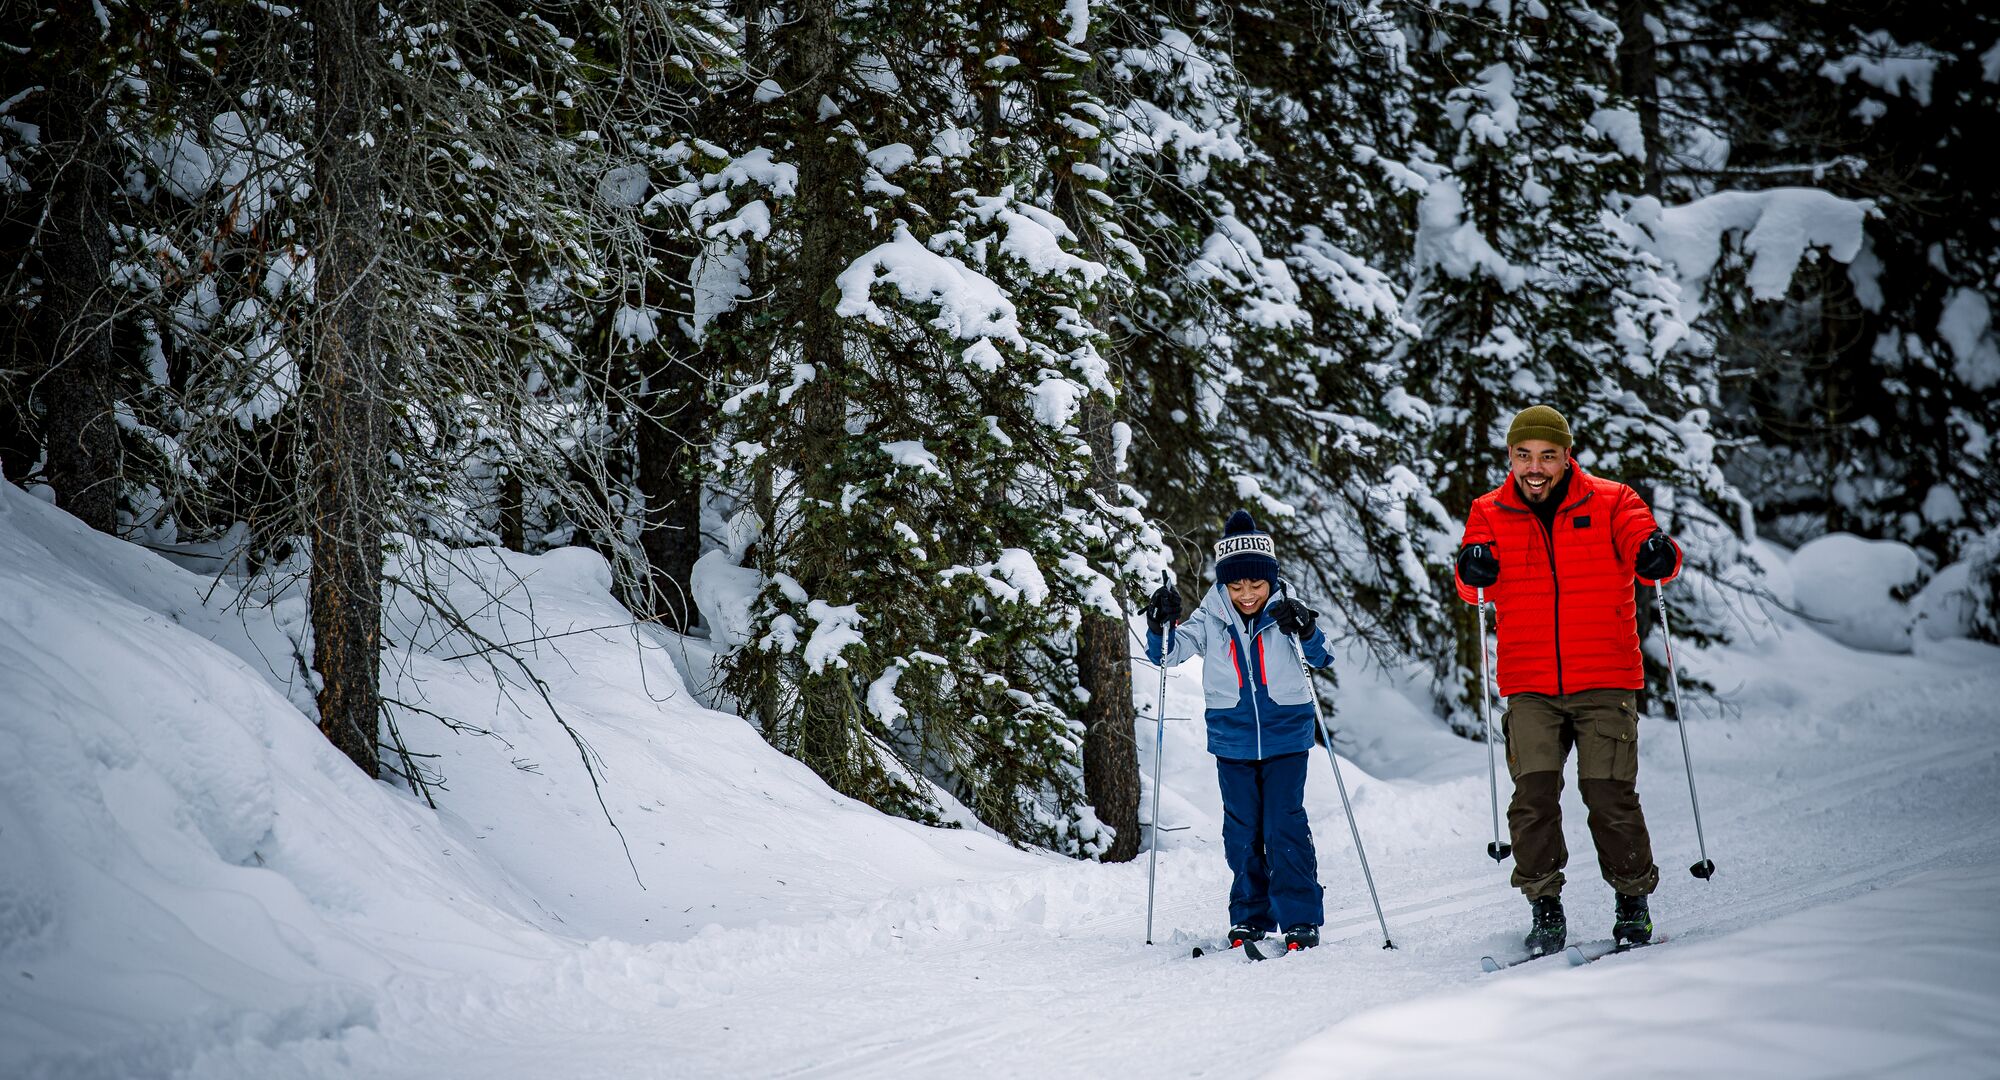 A family cross-country skis in Banff National Park on a snowy winter day